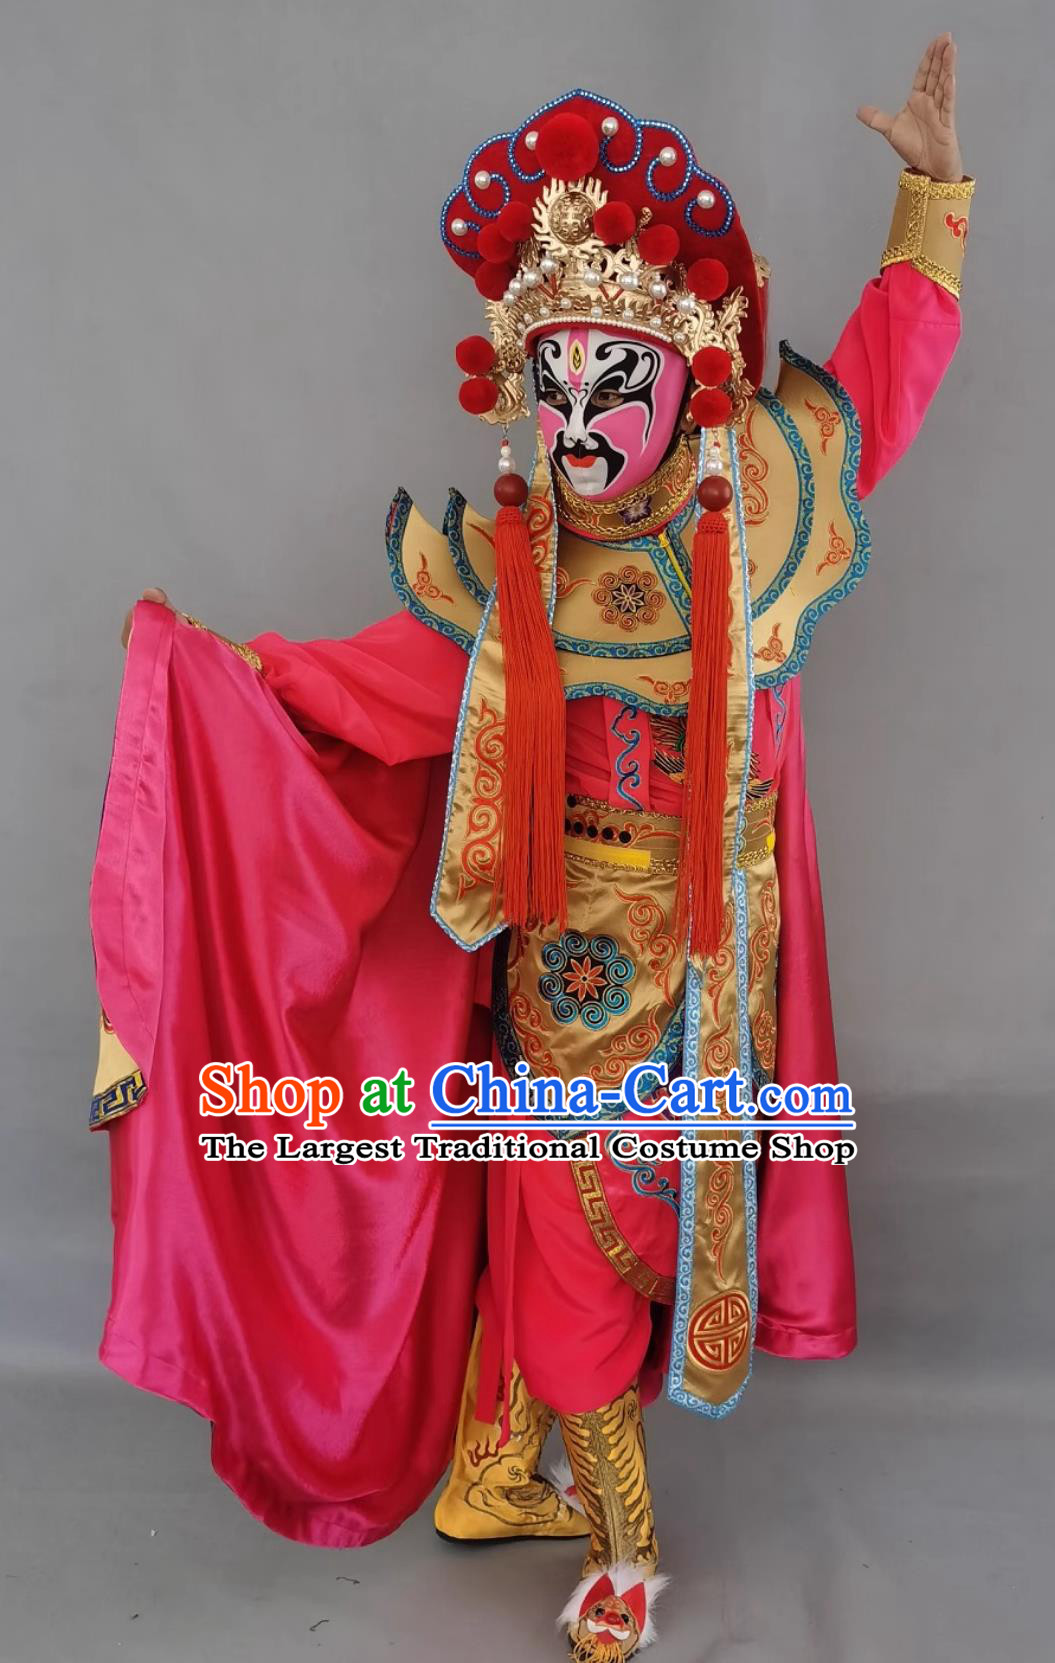 China Bian Lian Costume Sichuan Opera Face Changing Clothing Stage Magic Performance Golden and Pink Outfit